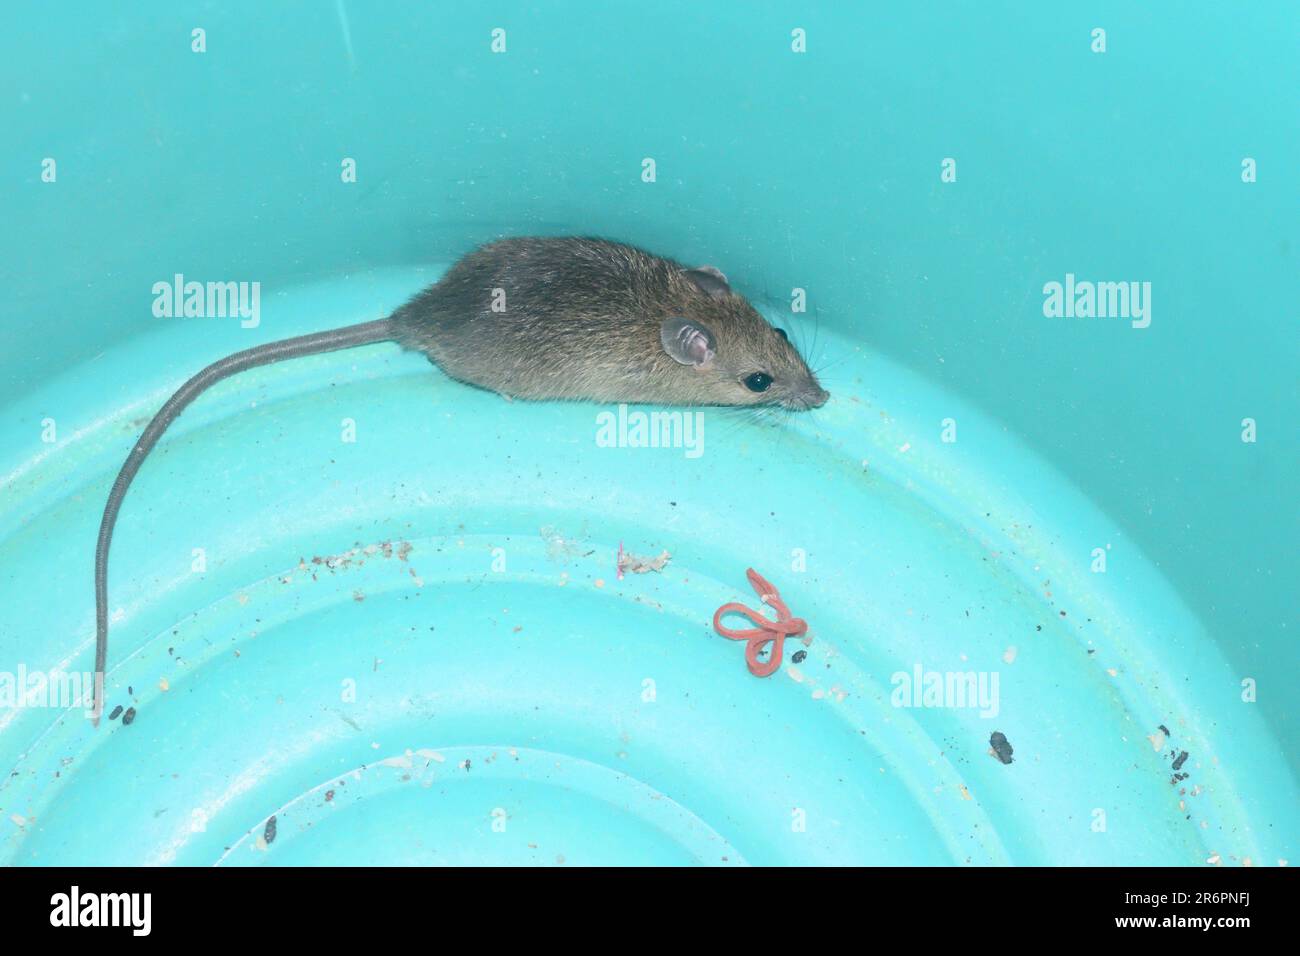 Rat in the green bucket, Mouse finding a way out of being confined, Removal of rodents that cause dirt and may be carriers of disease Stock Photo